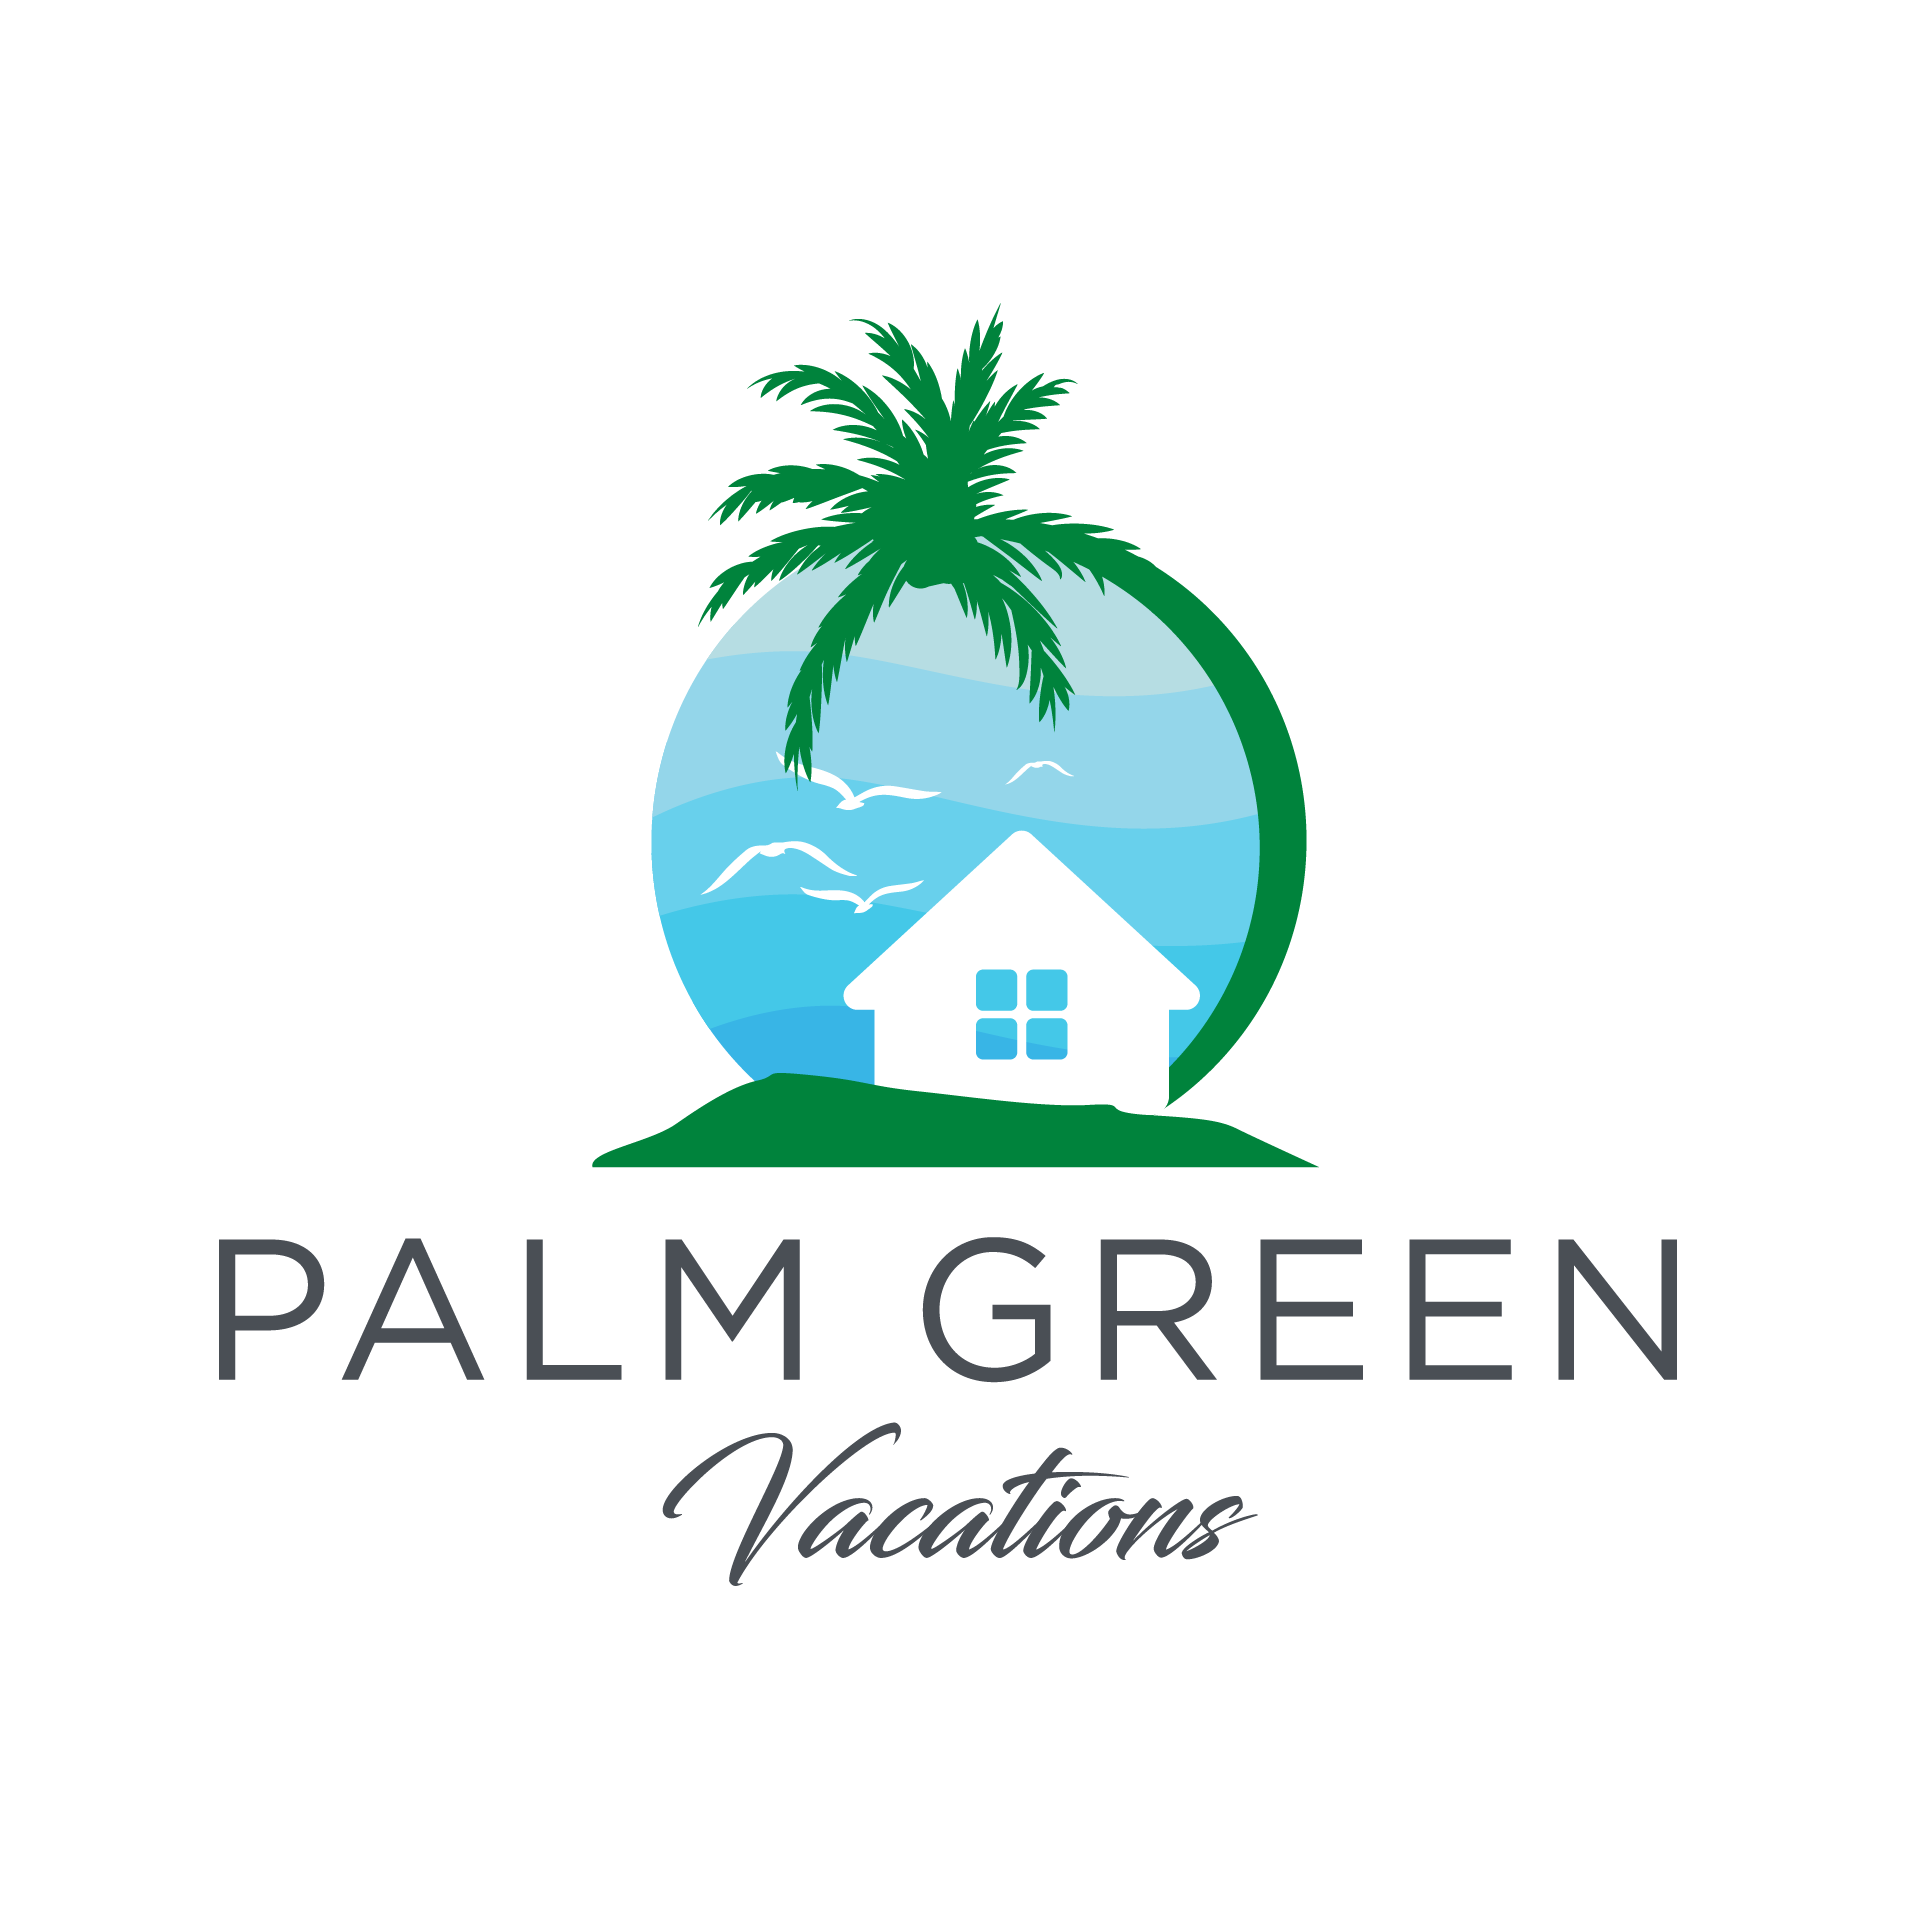 Palm Green Vacations